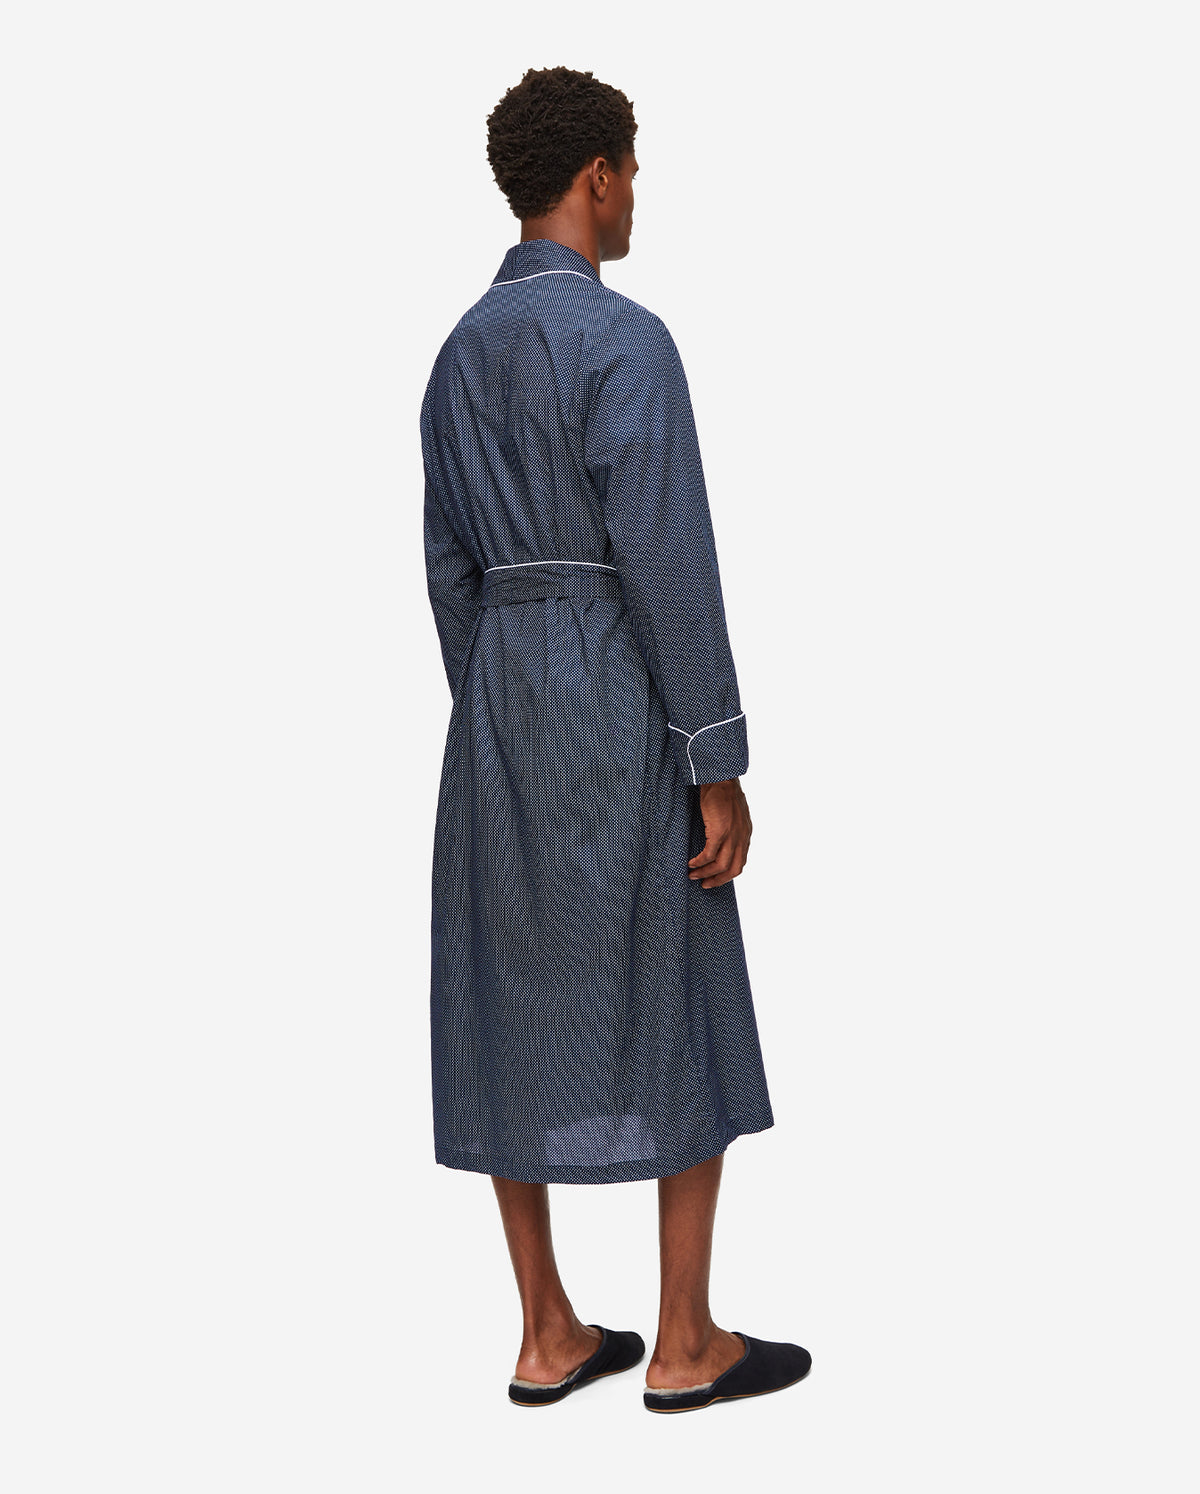 Plaza Robe With Piping - Navy